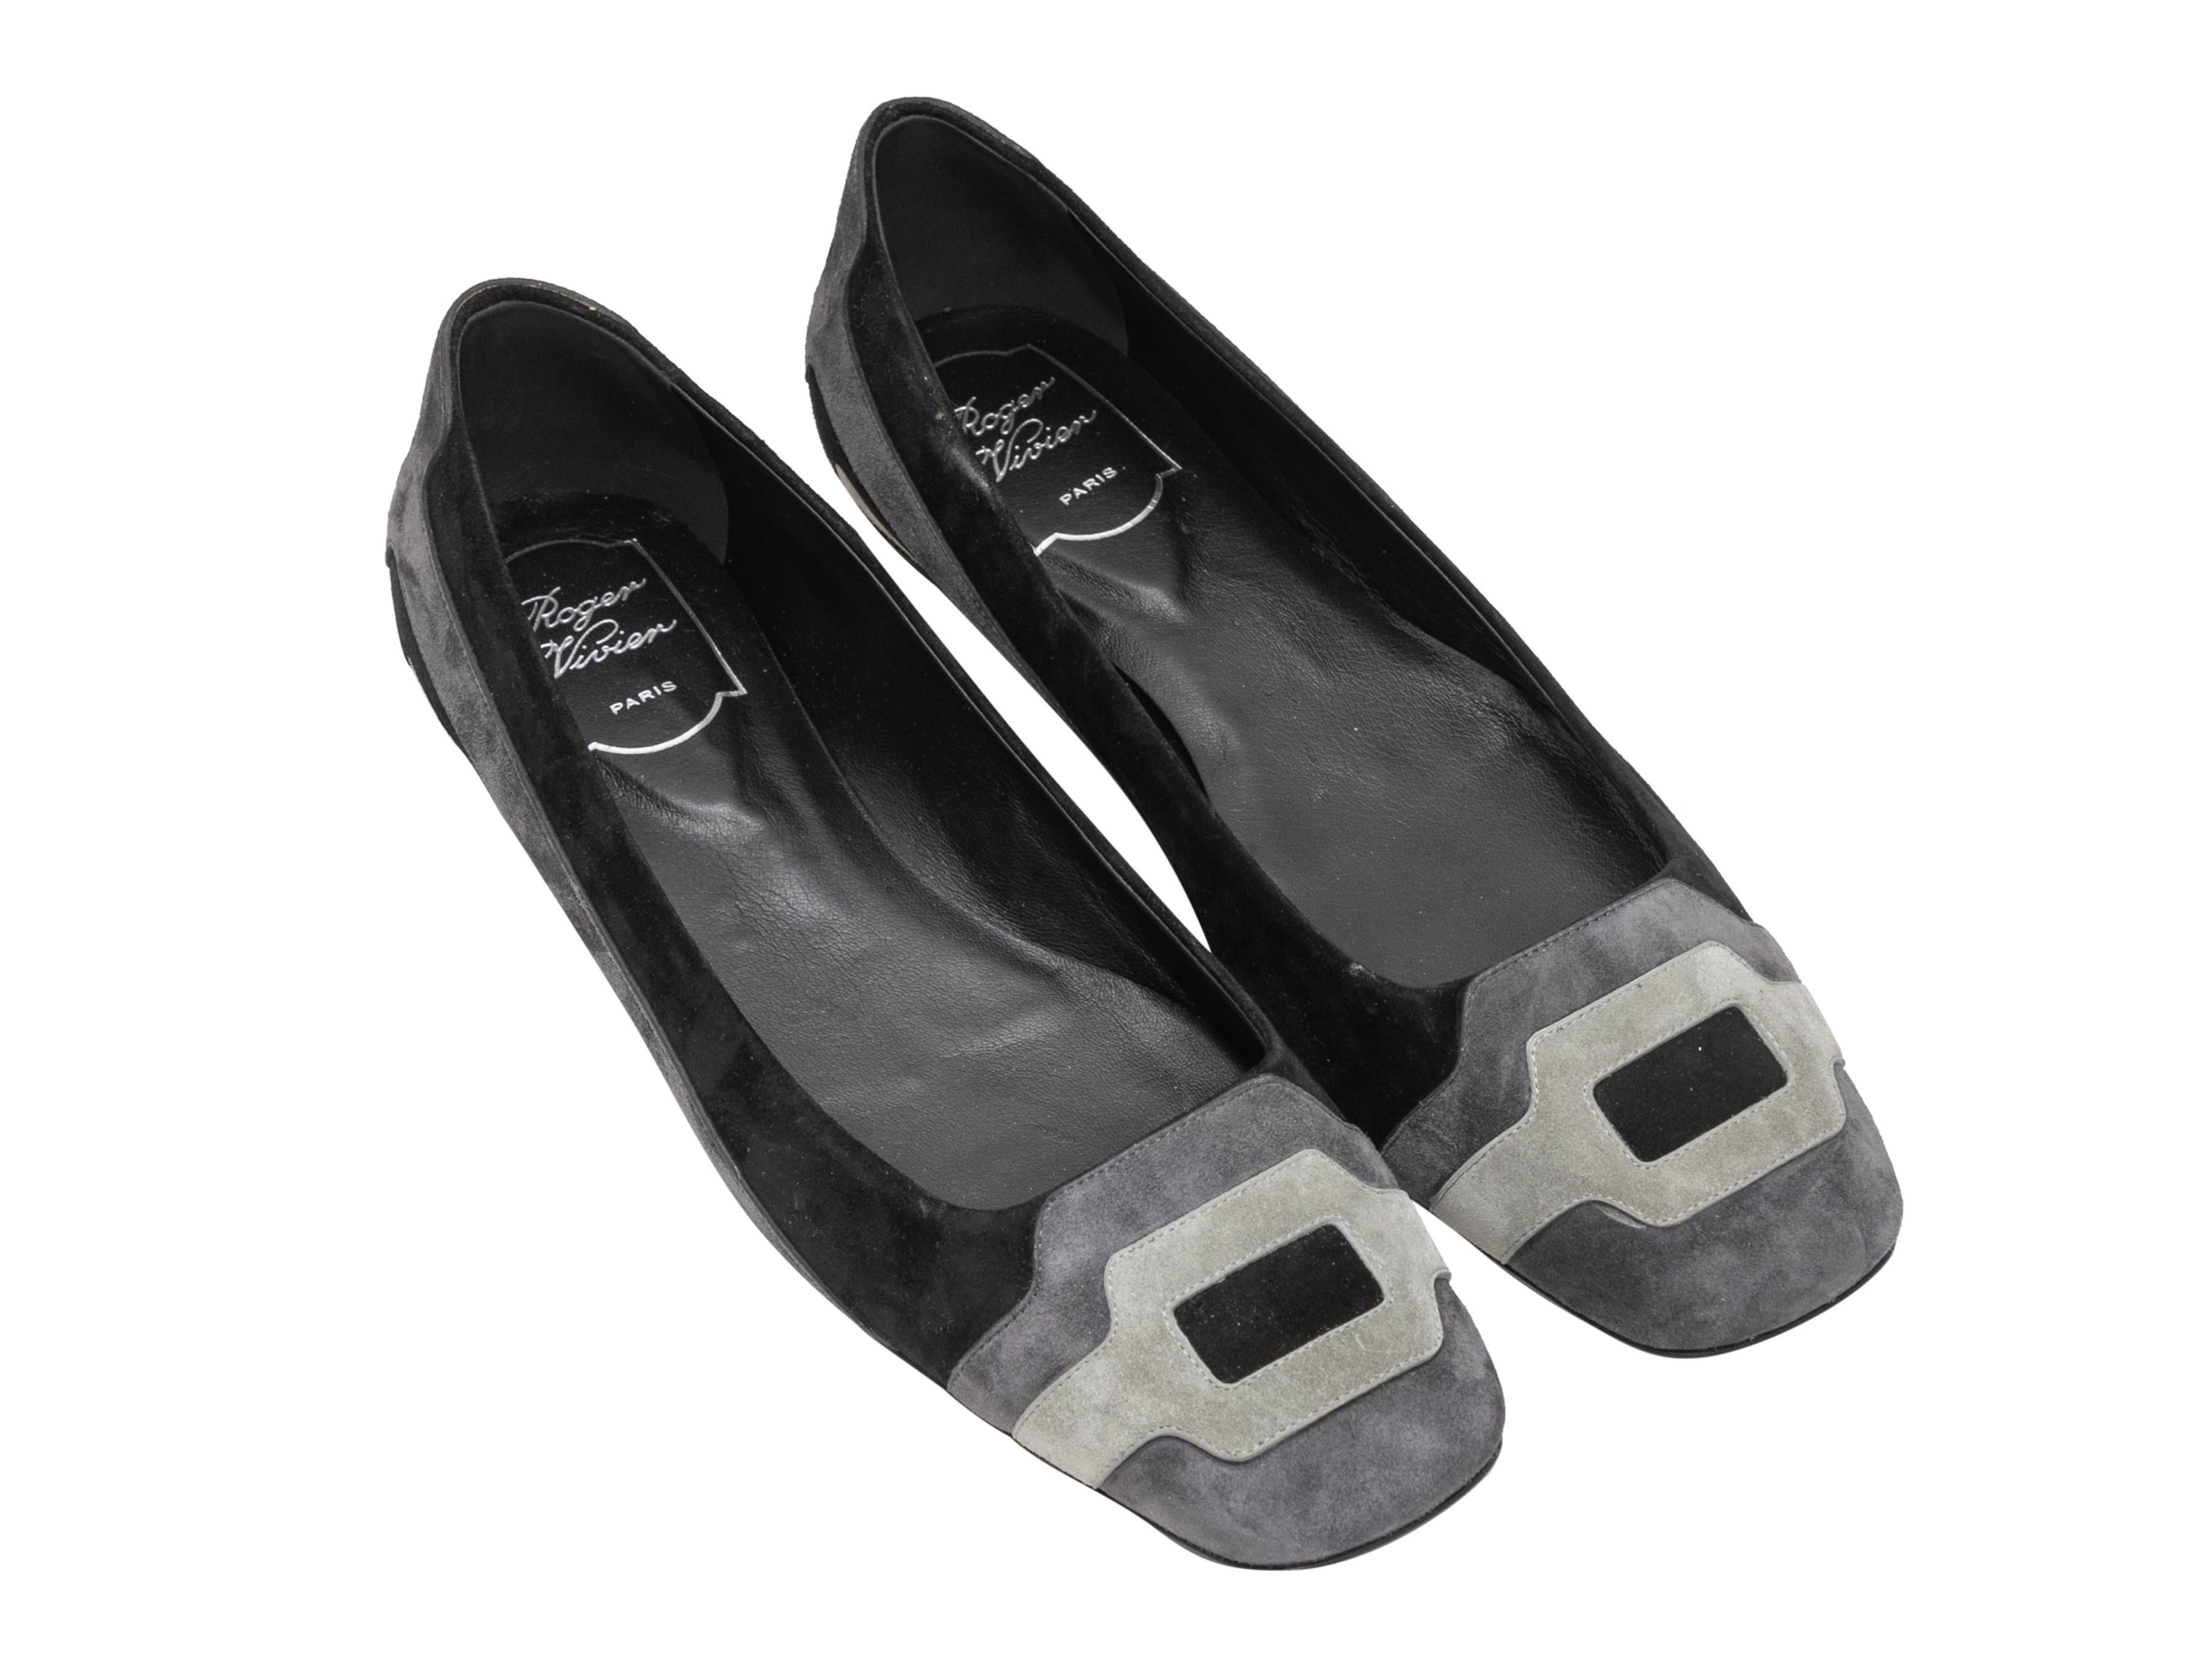 Black and grey square-toe suede ballet flats by Roger Vivier.

Designer Size: 39
US Recommended Size: 9